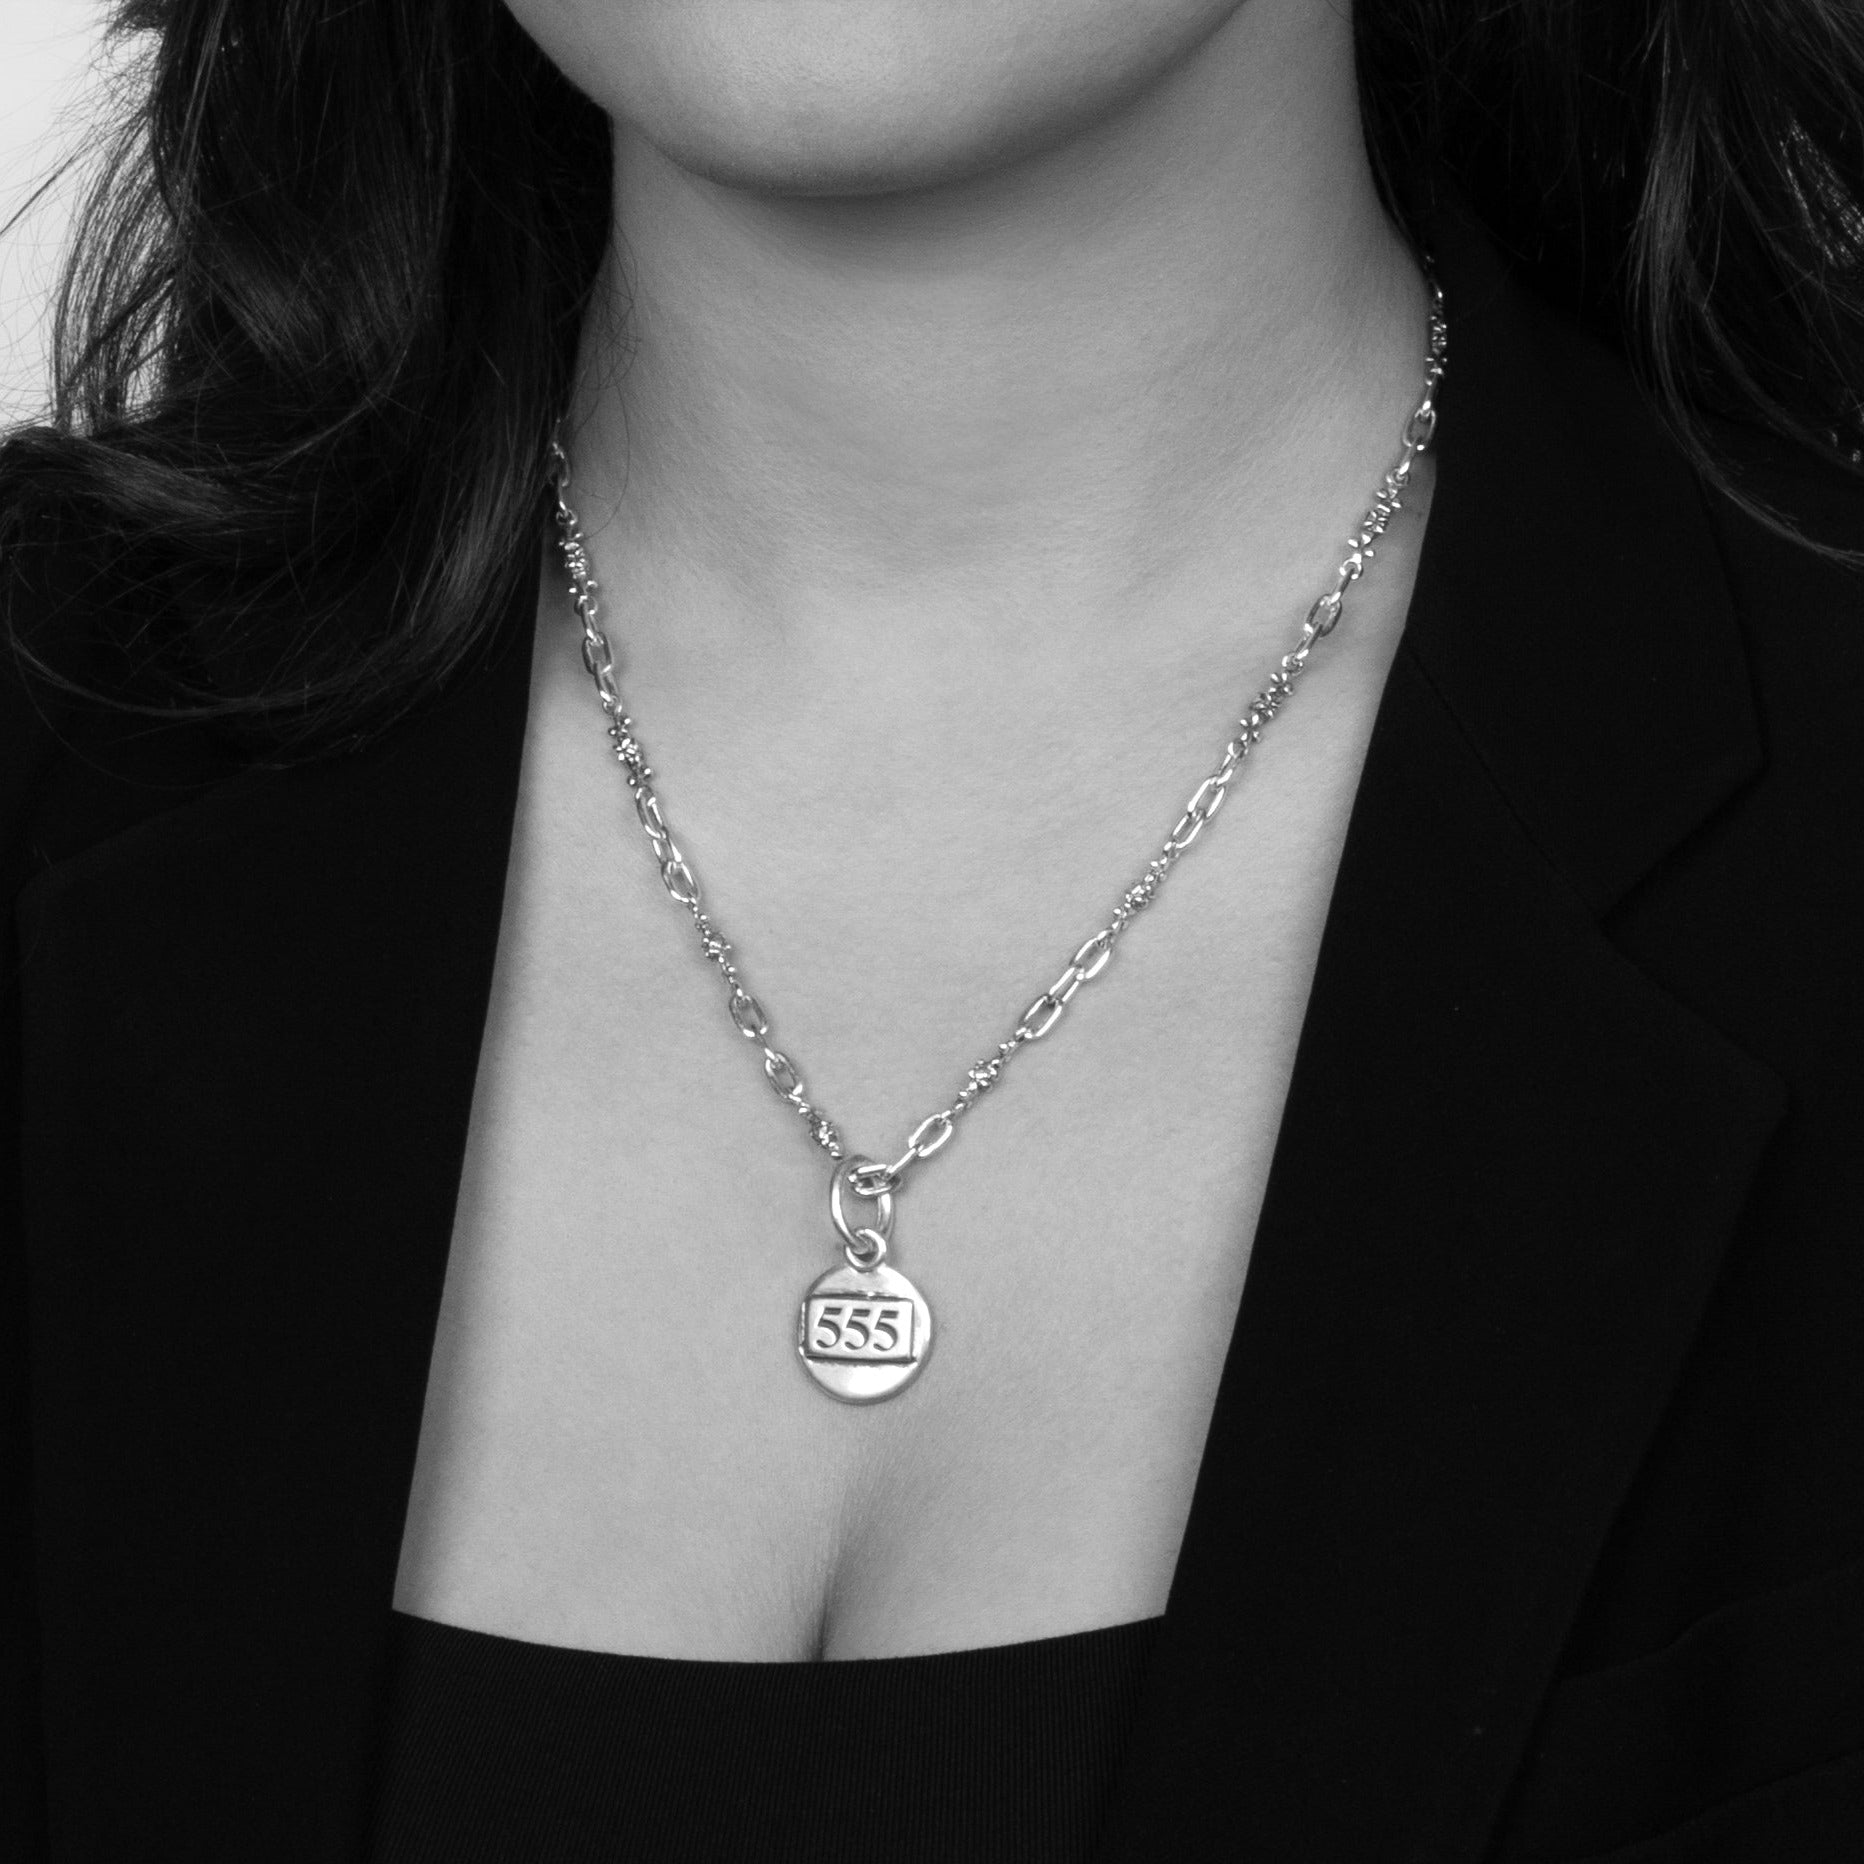 Solid Sterling Silver, centred with Angel Numbers on a plain coin shaped pendant shown on a model